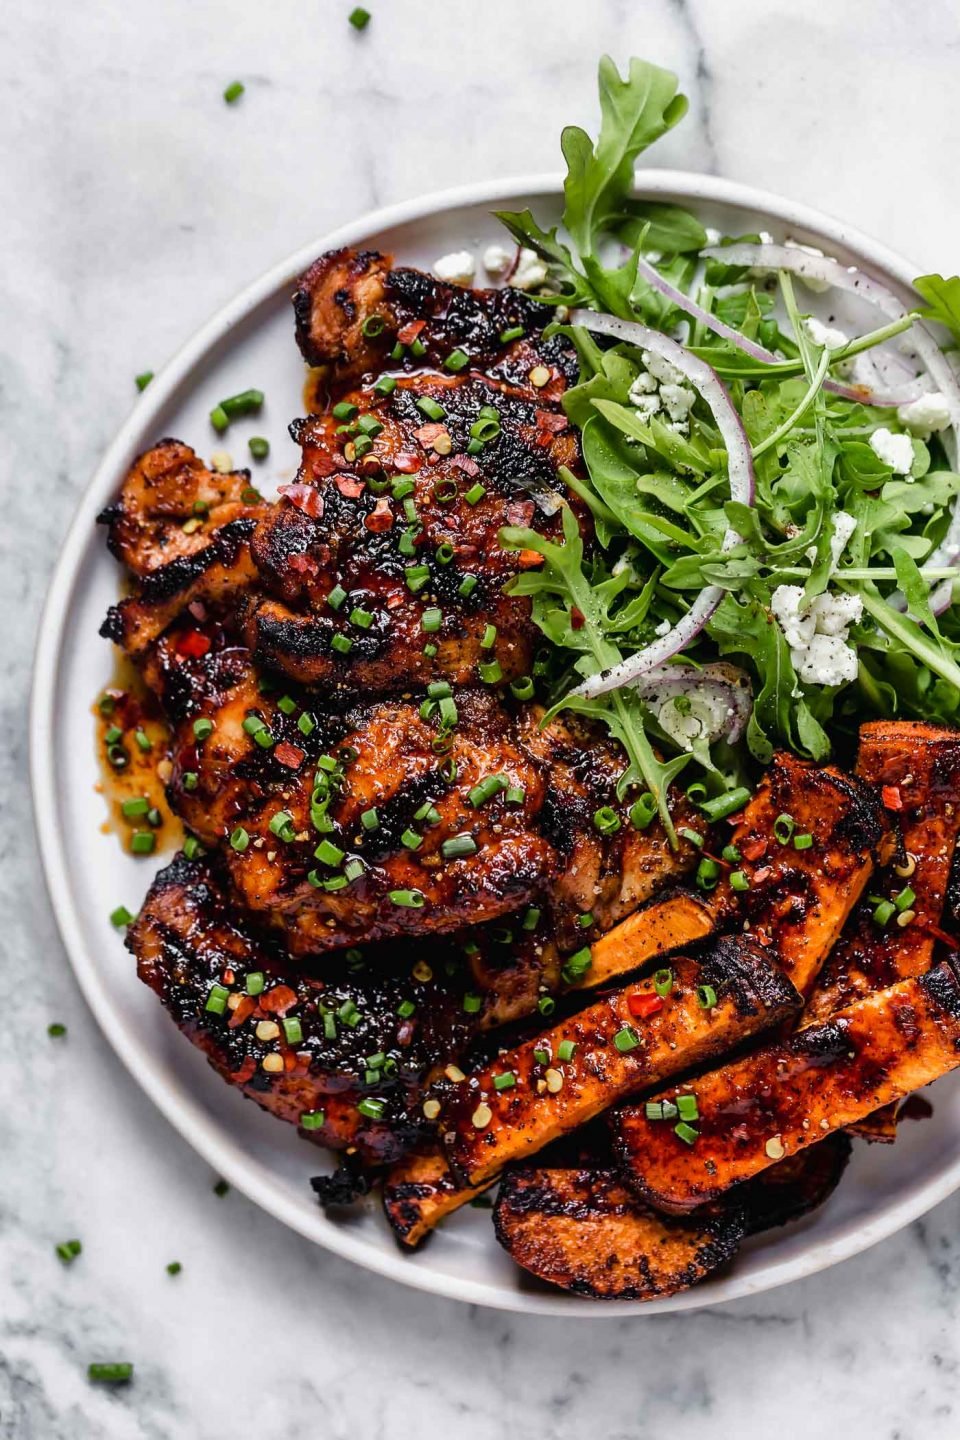 Equal parts zesty, sweet & spicy, this all-purpose grilling marinade hits on all of the the right notes. Brown sugar lends the perfect amount of sweetness to help create an addictively caramelized crust on whatever you’re grilling, & pantry spices like chili powder & smoked paprika add just the right amount of kick. #playswellwithbutter #marinaderecipe #easymarinade #grillingrecipes #steakmarinade #chickenmarinade #porkmarinade #vegetablemarinade